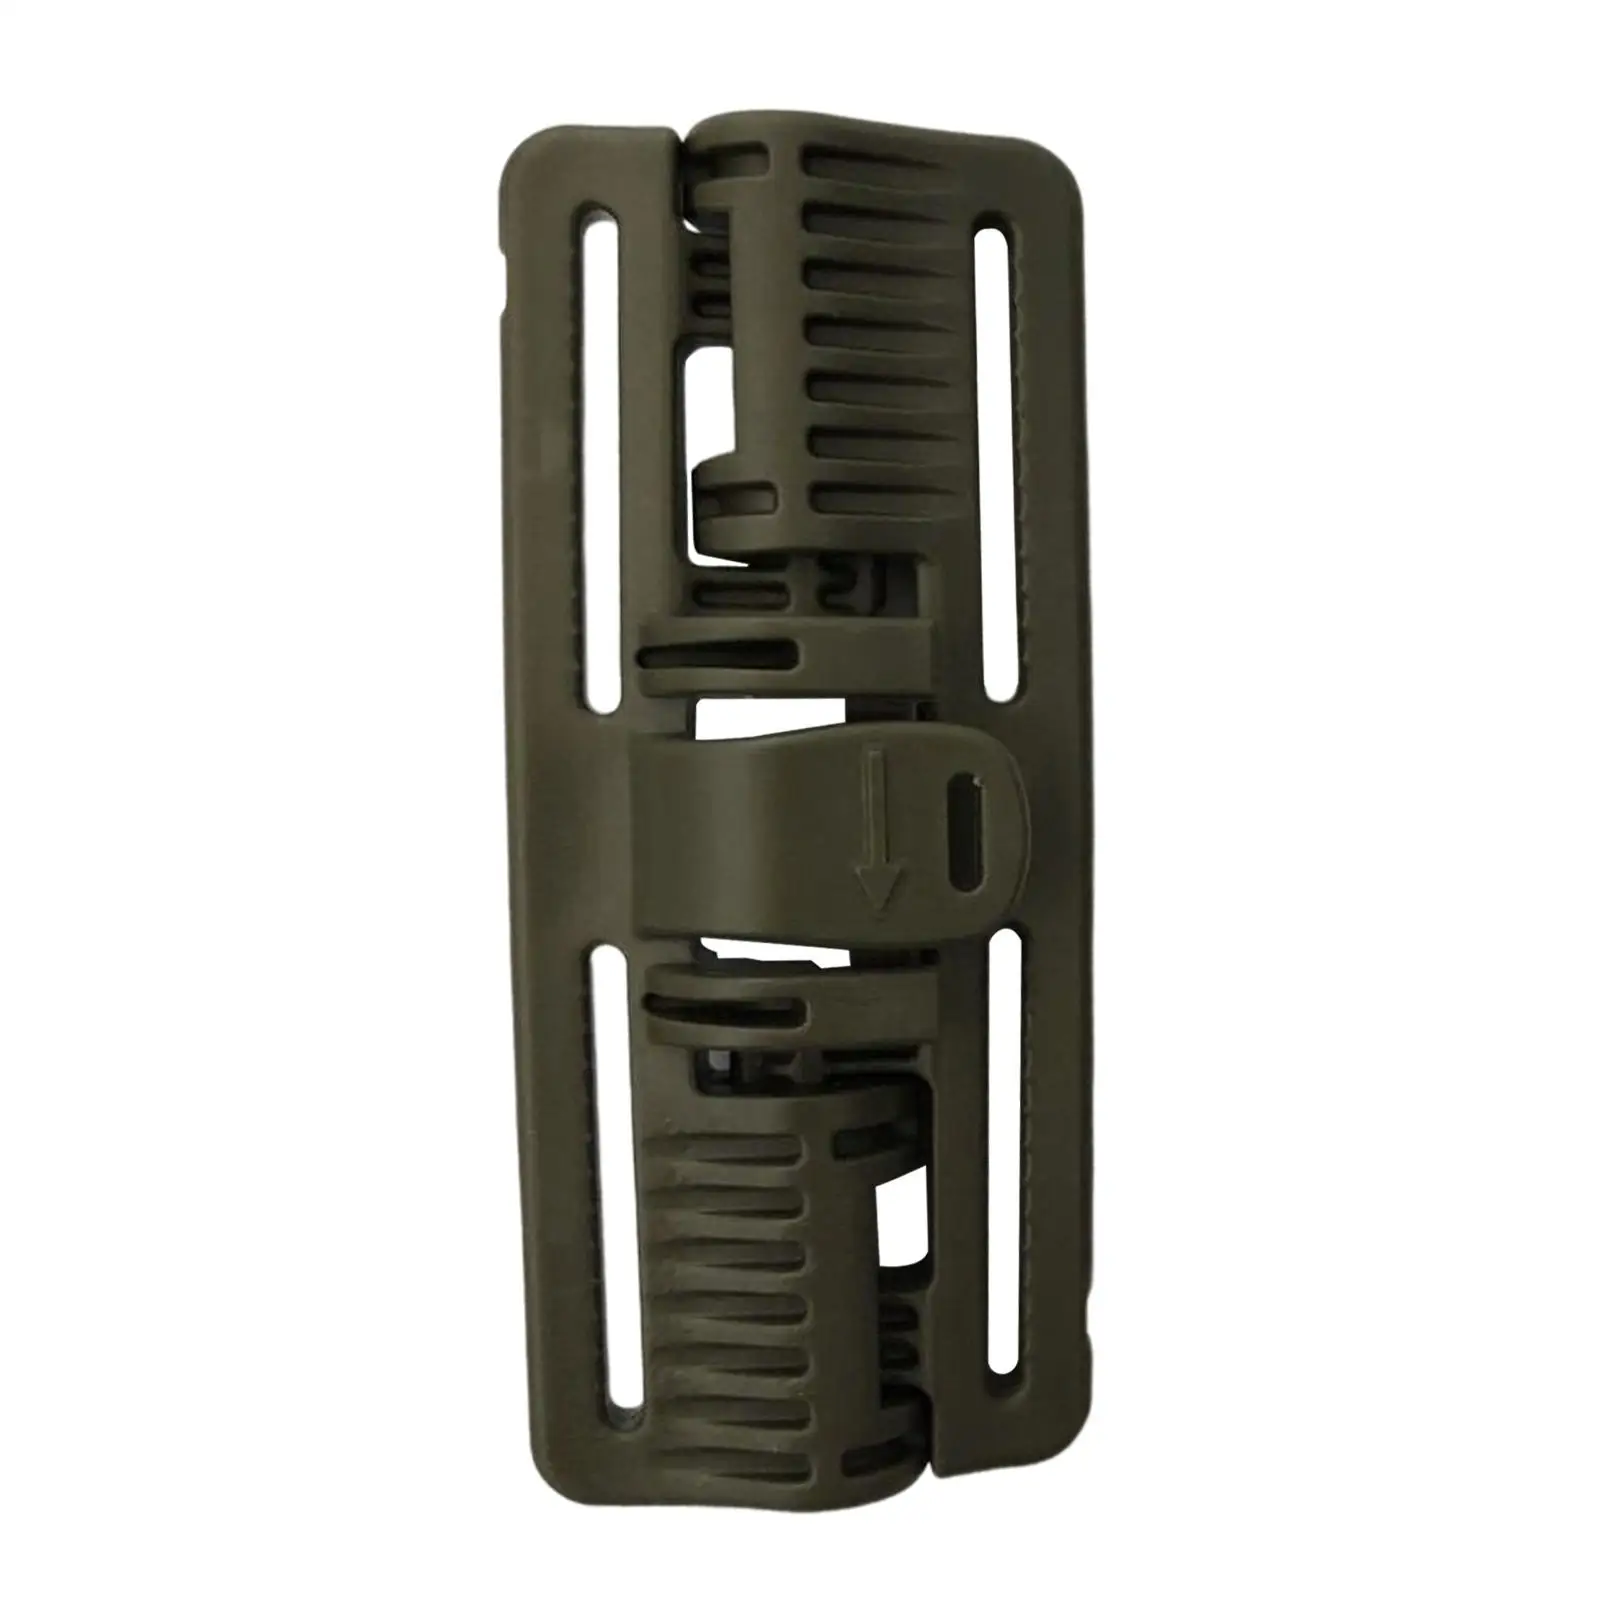 Vest Quick Release Buckle, 1.5 inch Quick Release Assembly Kit Removal Buckle for Hunting, Durable